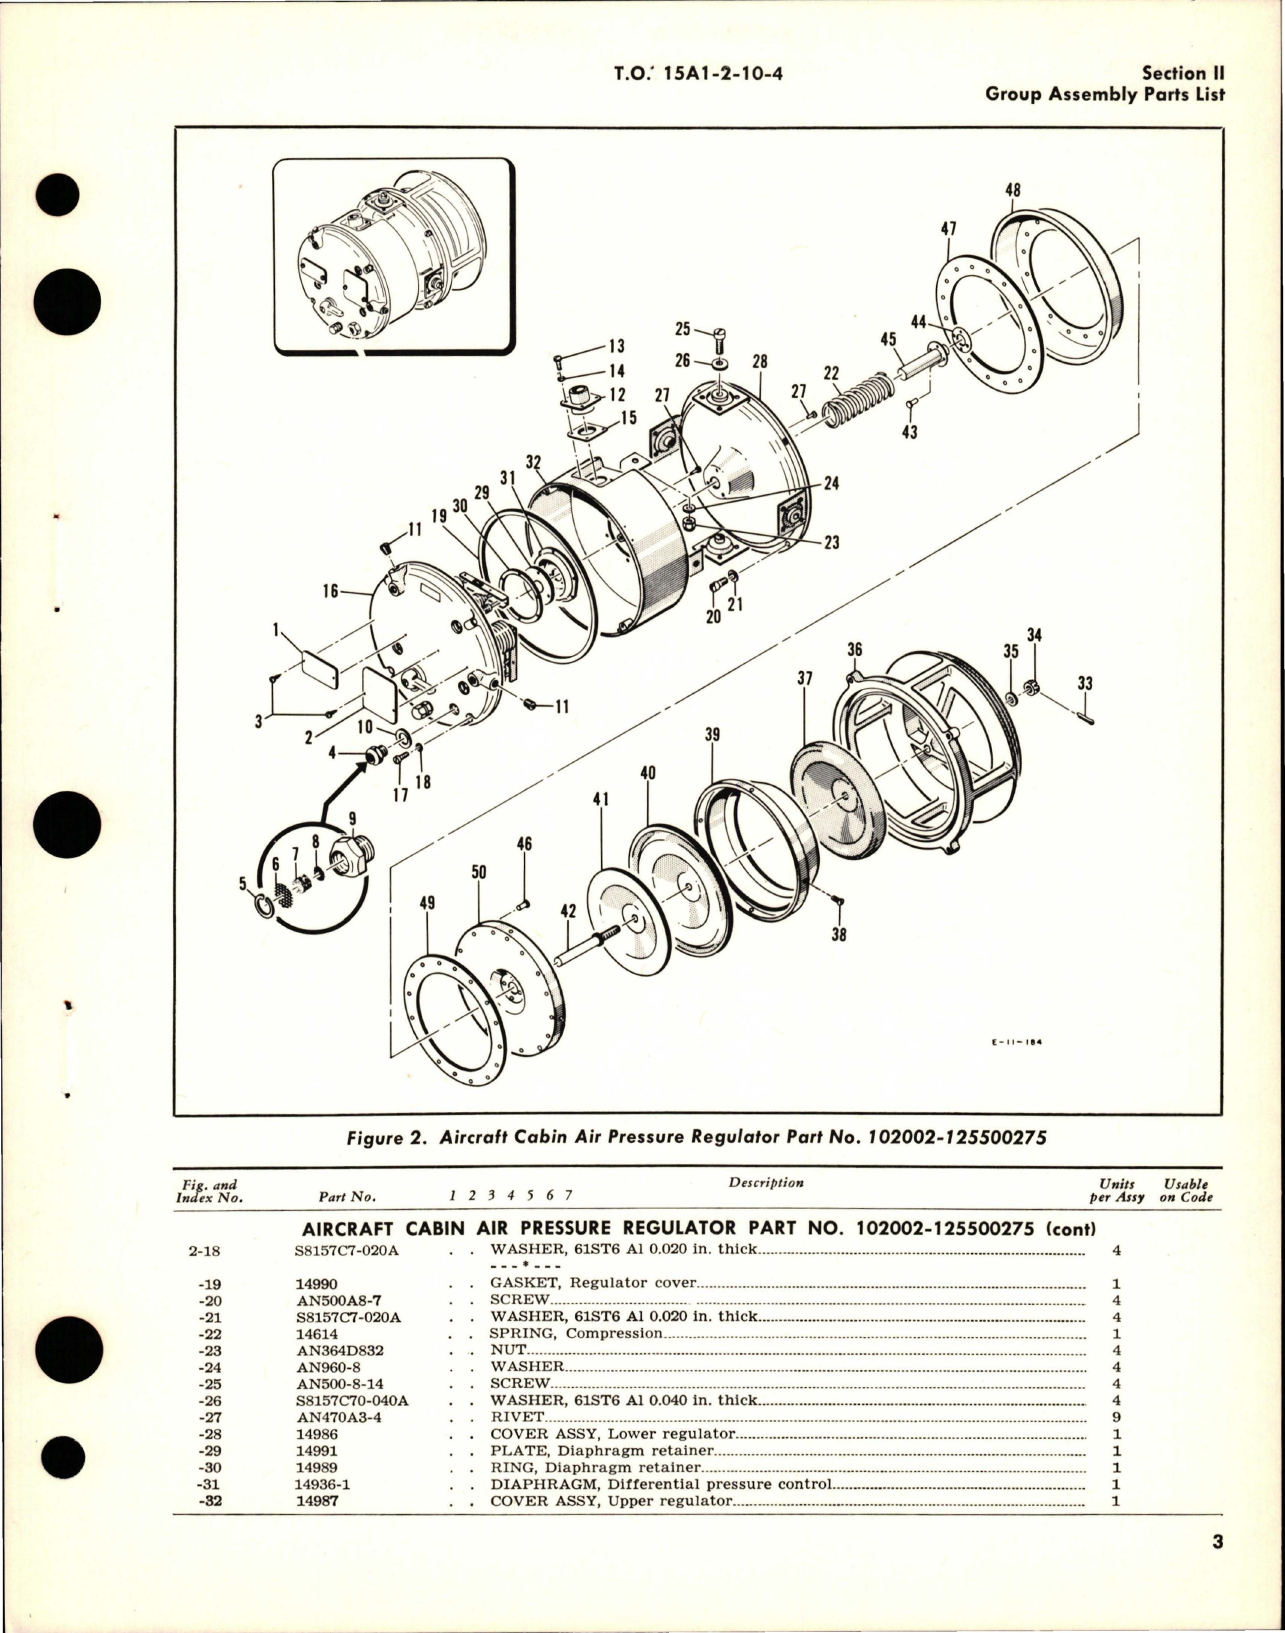 Sample page 5 from AirCorps Library document: Illustrated Parts Breakdown for Aircraft Cabin Air Pressure Regulators